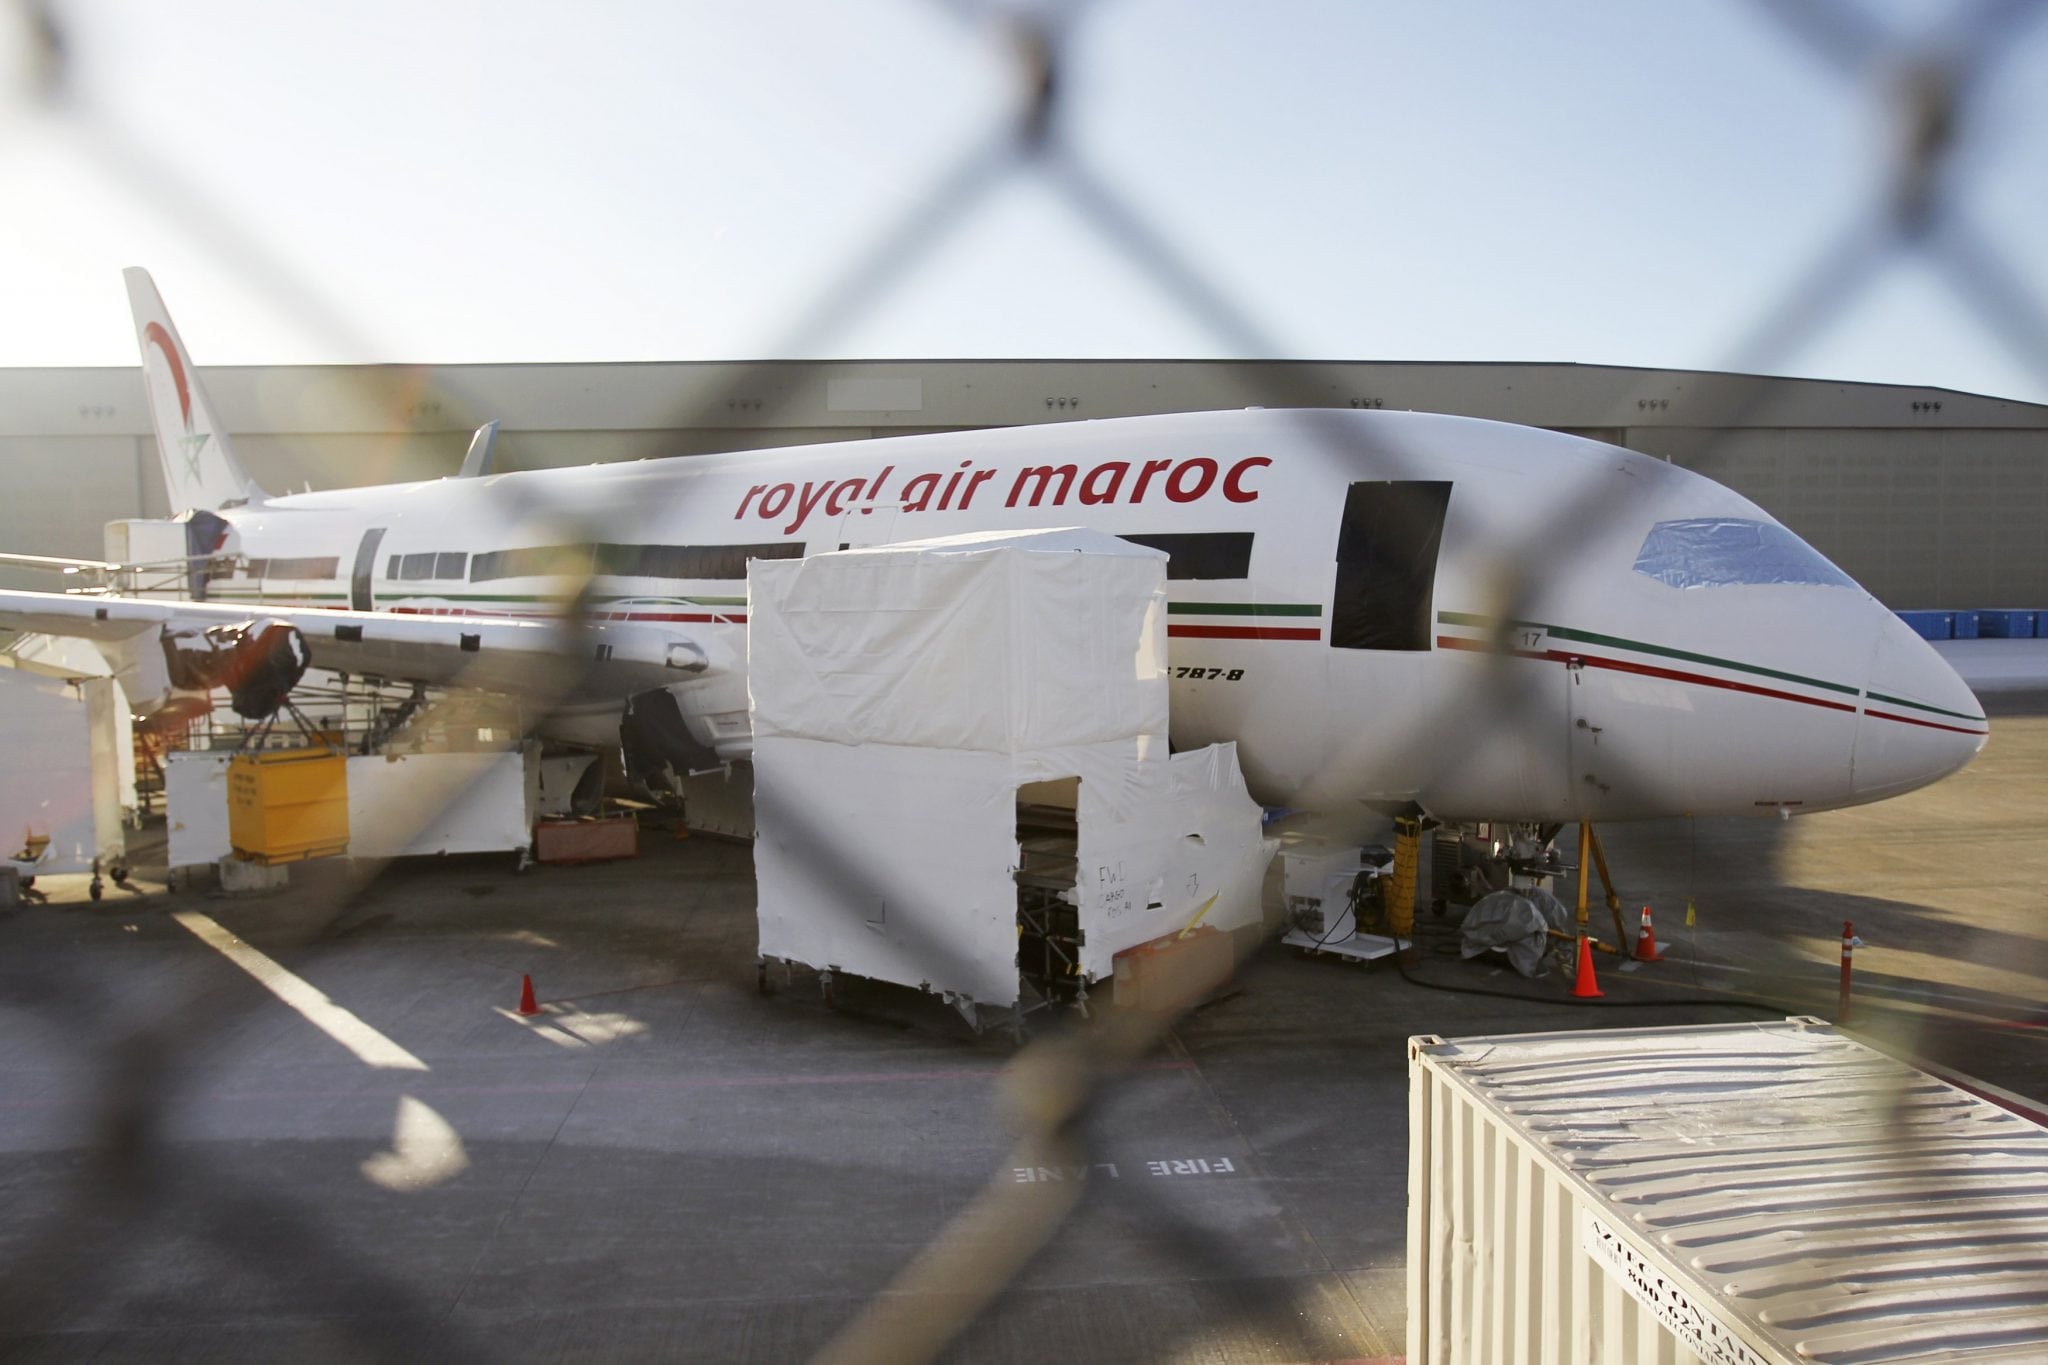 A 787 Dreamliner jet painted in Royal Air Maroc livery, sits idle on the tarmac parking at Paine Field in Everett. 